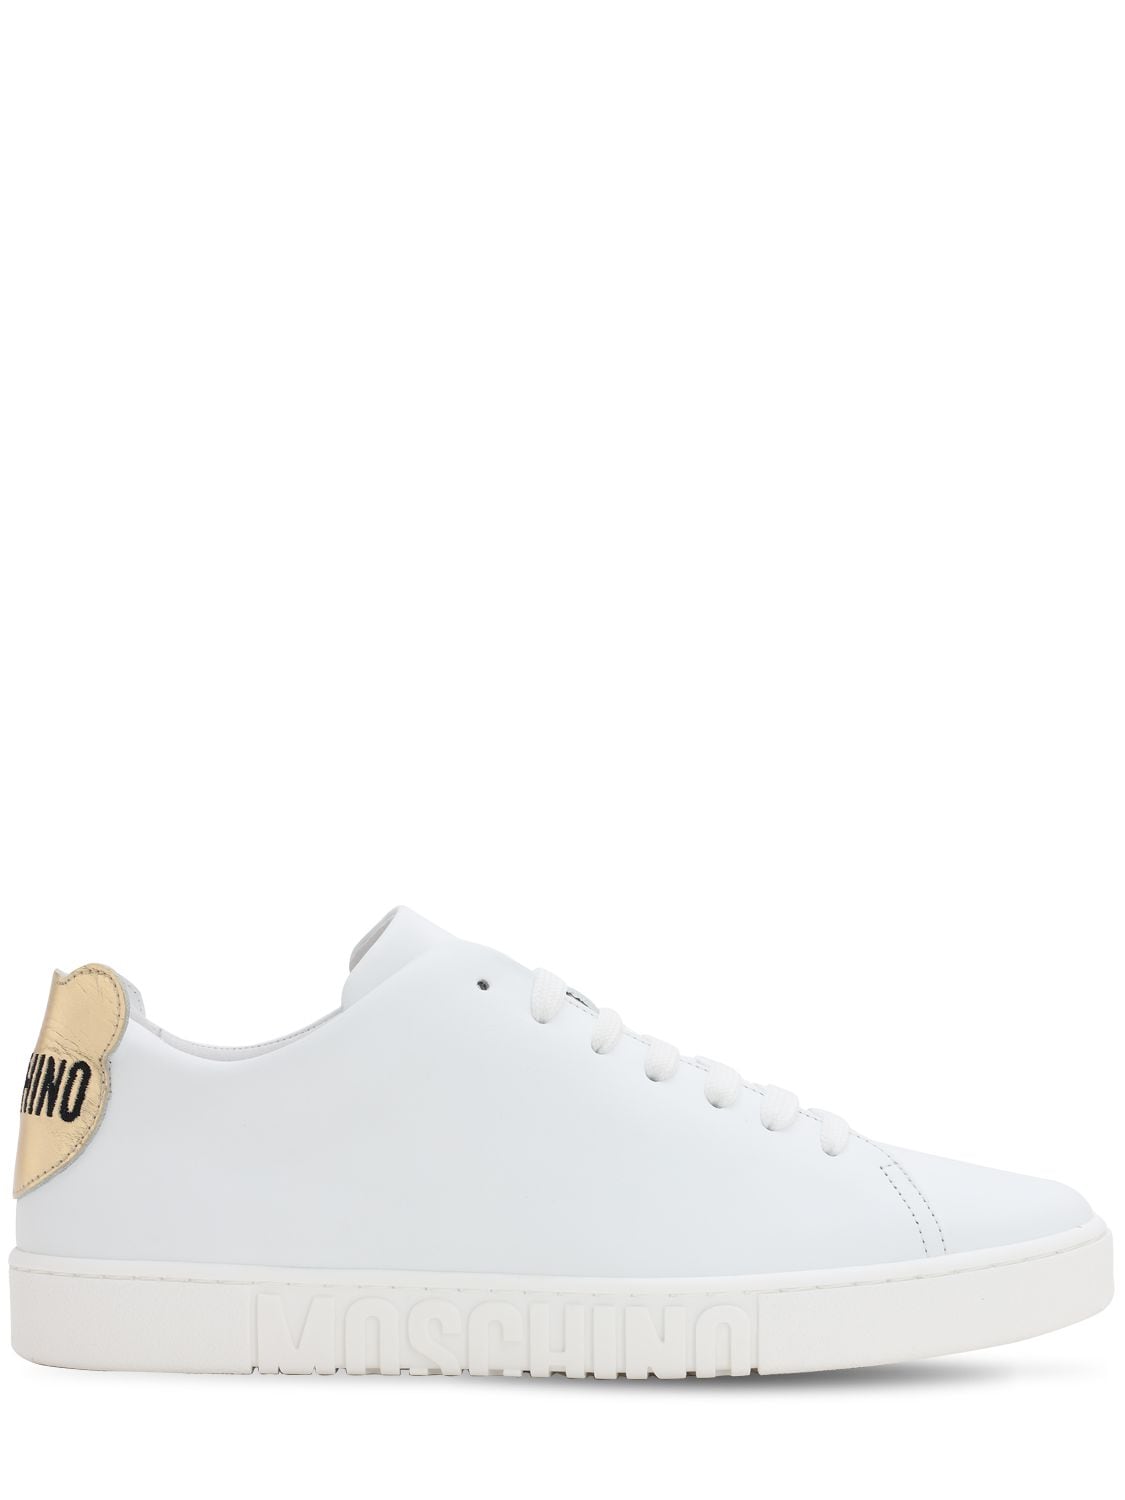 MOSCHINO LEATHER SNEAKERS W /BEAR PATCH,70IATO001-MTBB0